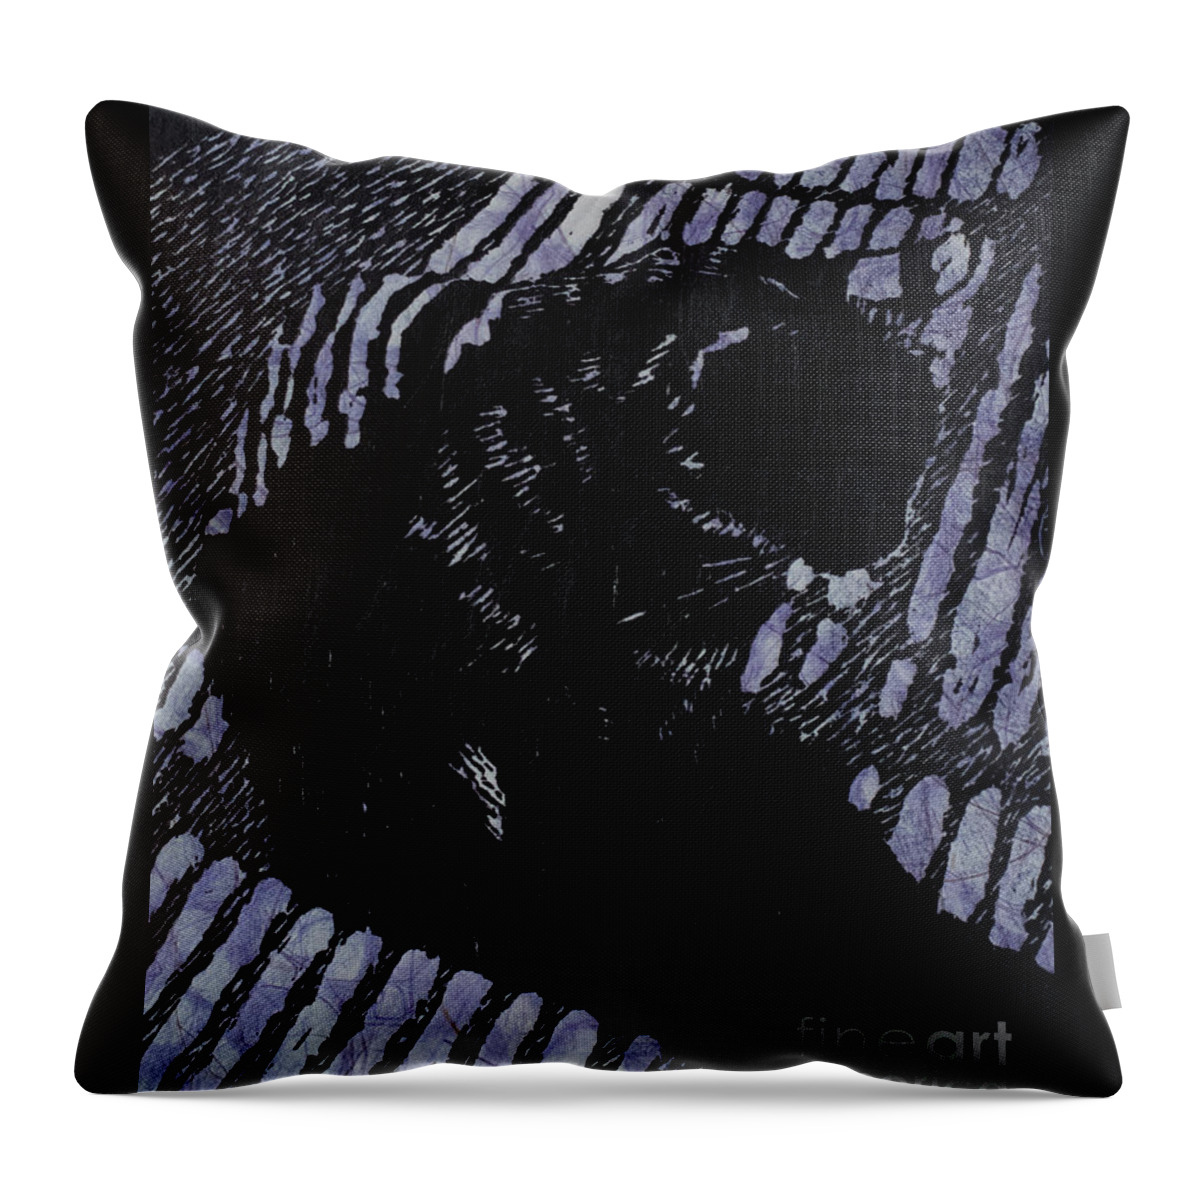 Lavender Throw Pillow featuring the mixed media Jazz by Jackie MacNair